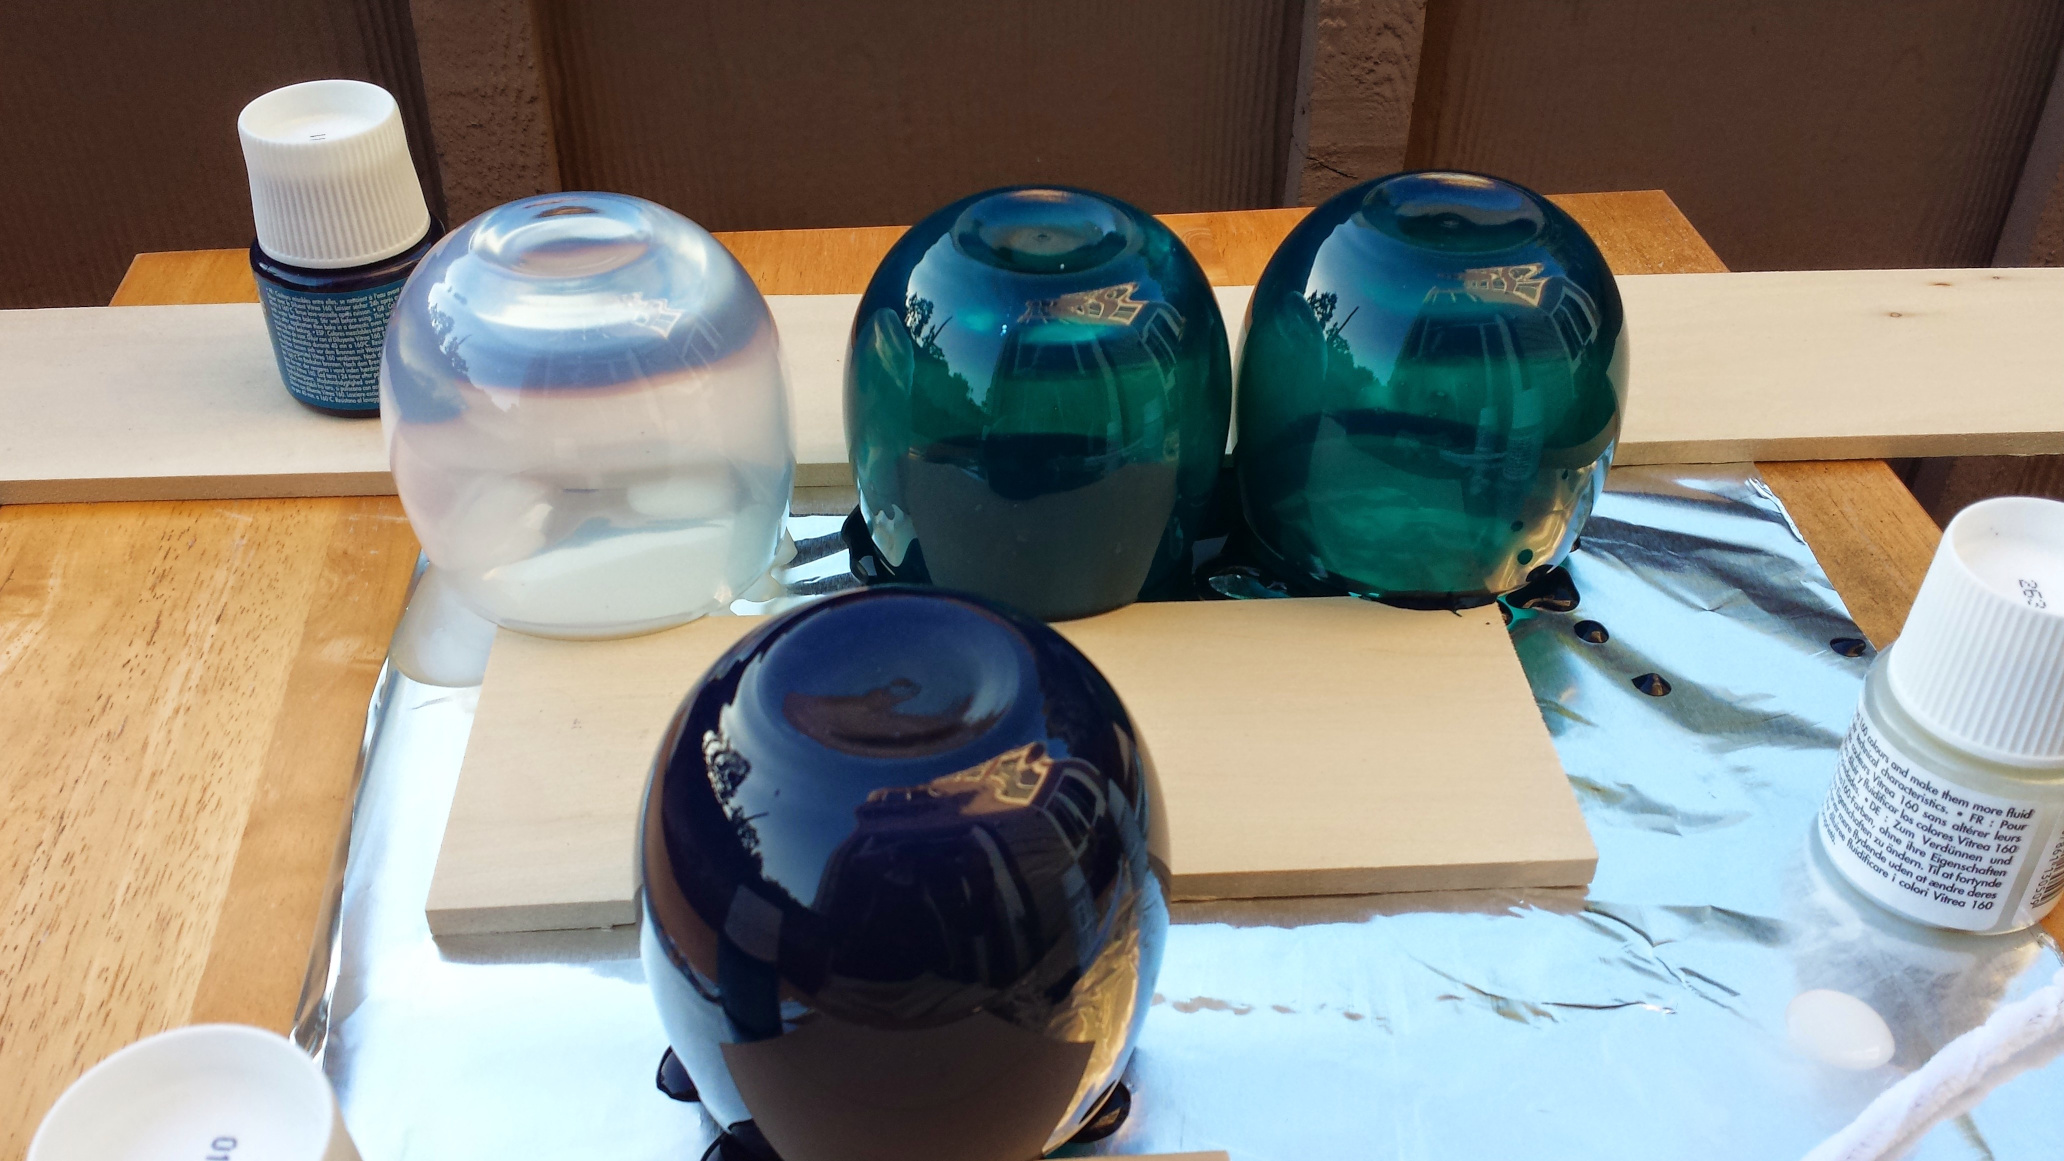 A series of four glass vases with different color treatments sitting upside down on a work bench.